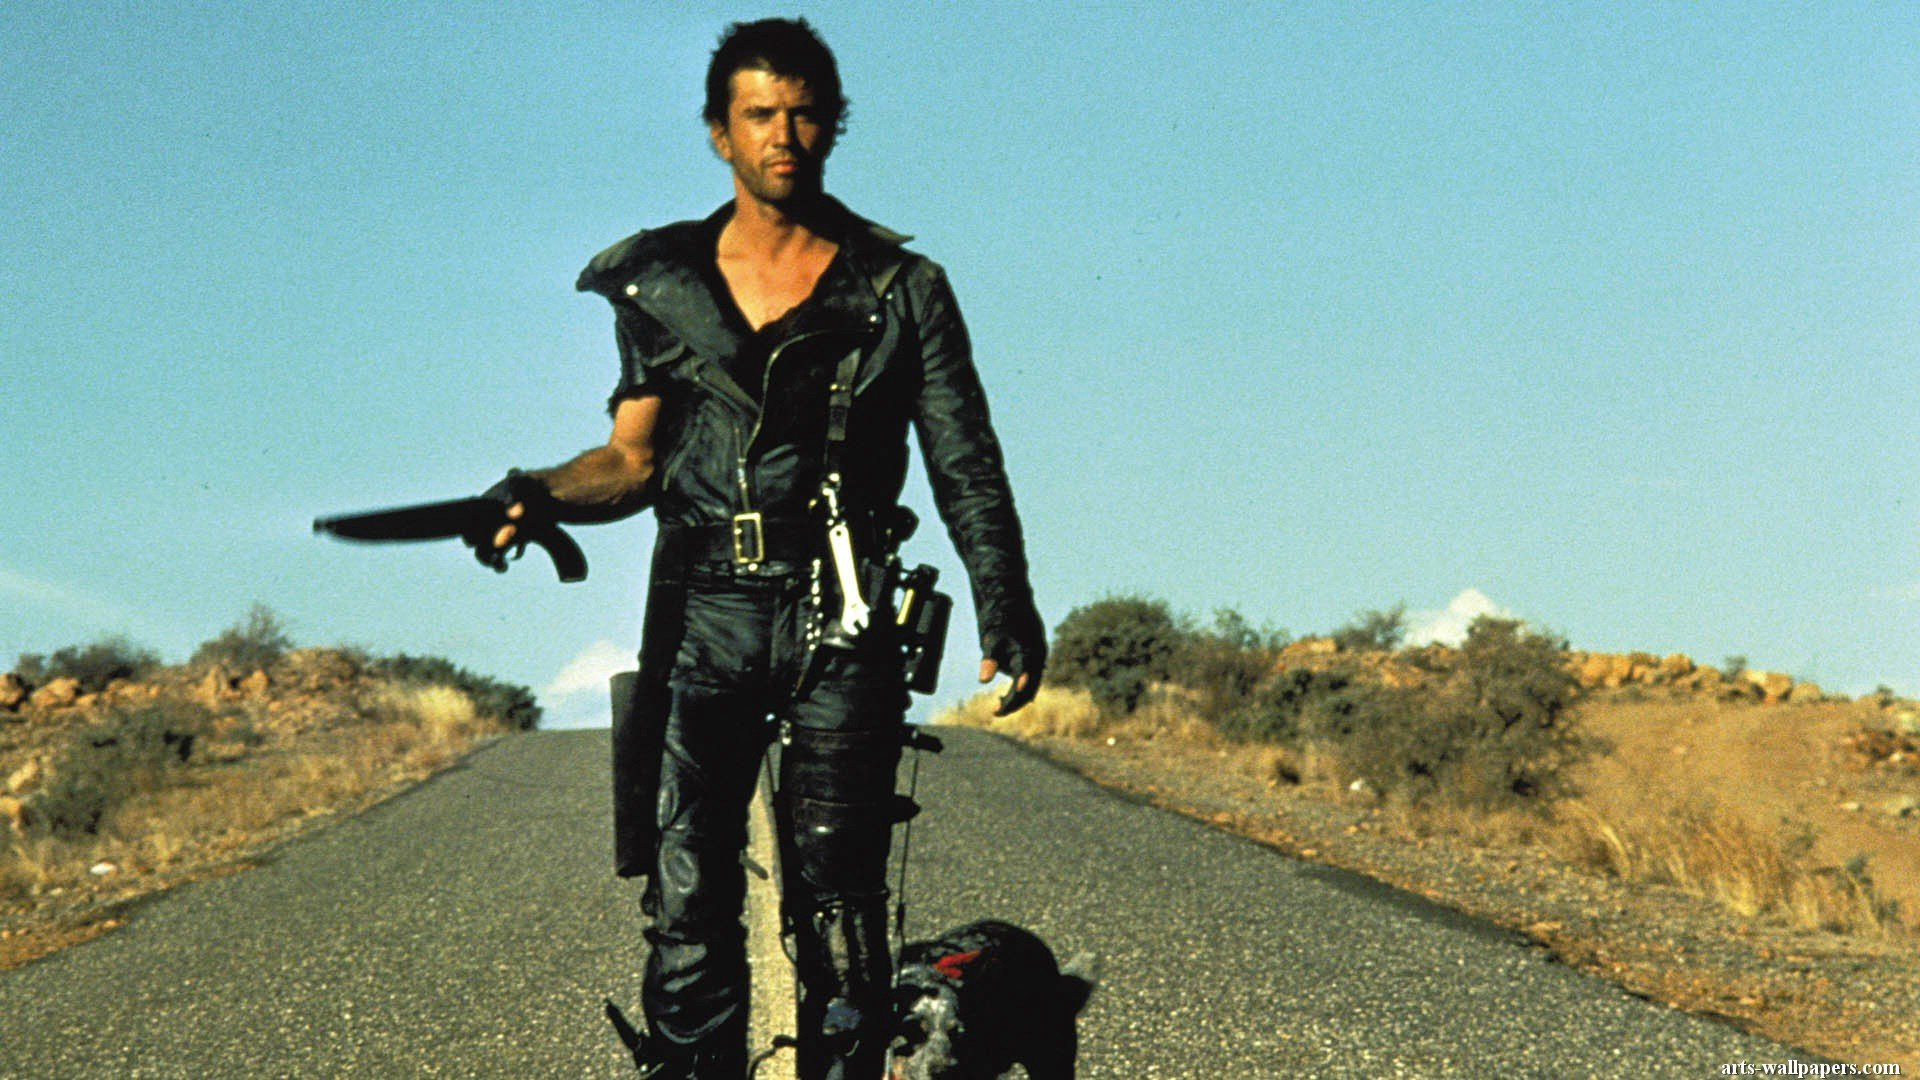 Mad Max Movie HD Wallpaper Widescreen The Road Warrior 1981